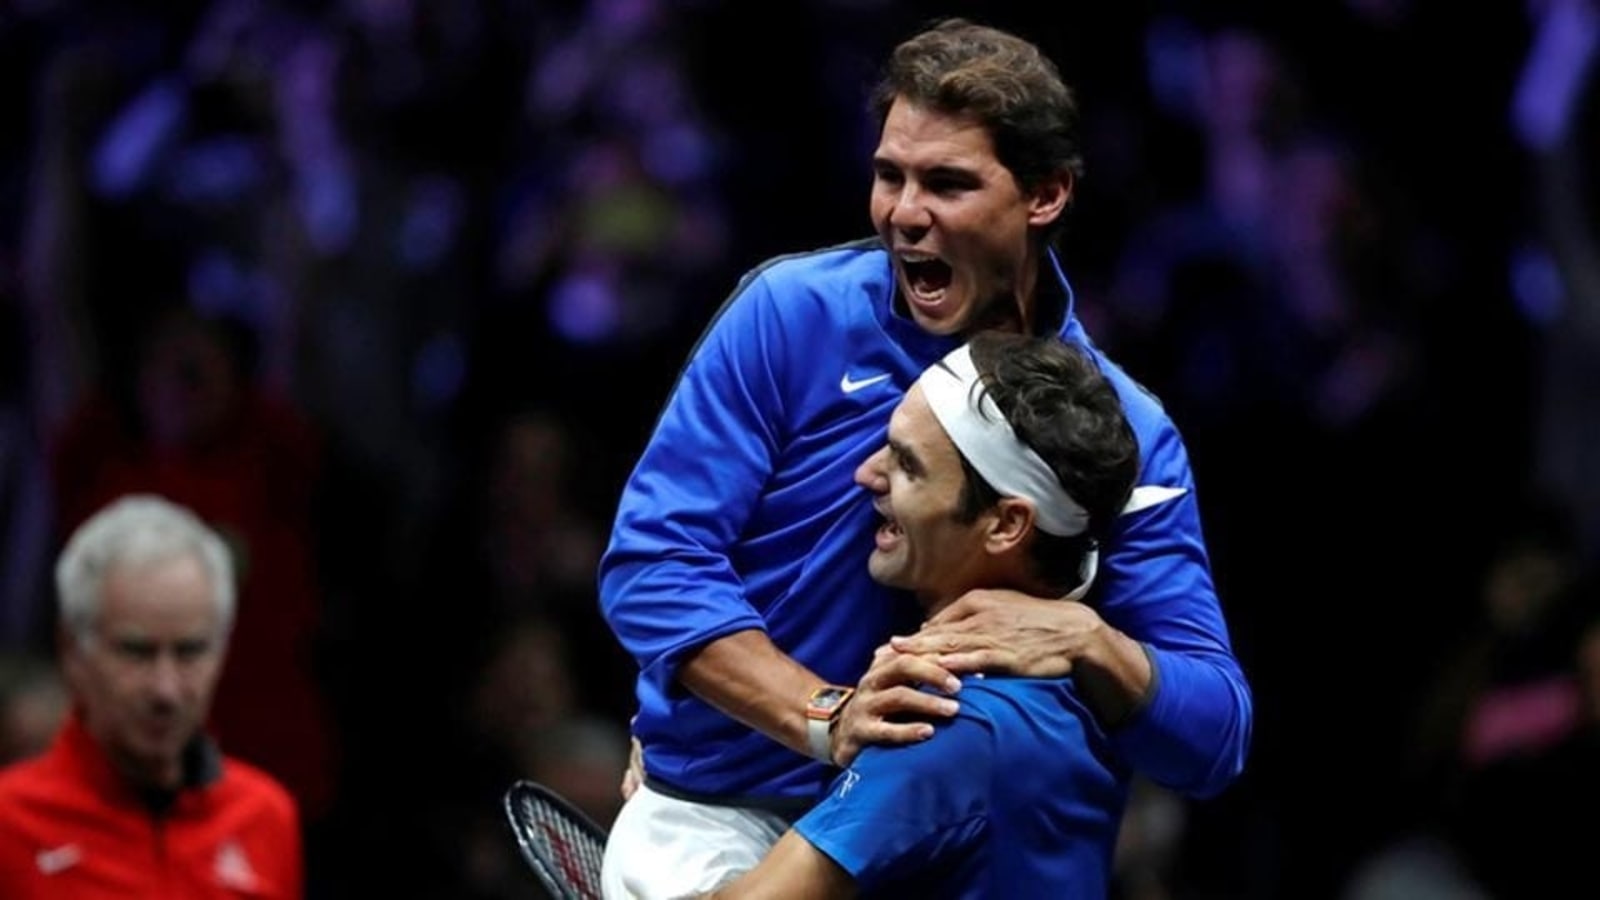 roger-federer-s-classy-response-to-rafael-nadal-after-tennis-rival-s-emotional-retirement-message